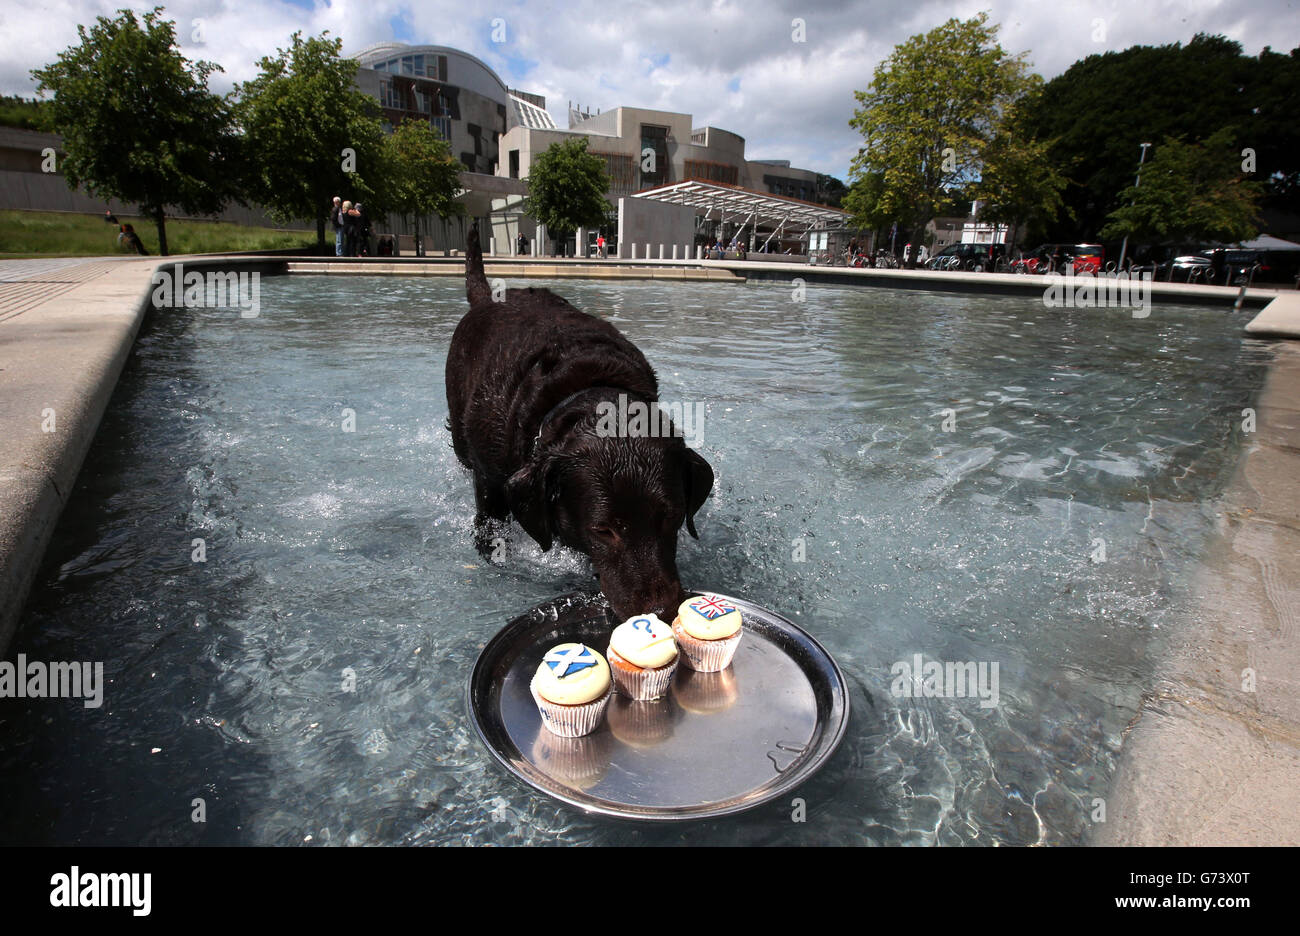 Molly the dog shows an interest in a tray with a Union Flag cupcake, a Saltire Flag cupcake and a Question Mark cupcake floating in a pond outside the Scottish Parliament, as members of the public are being invited to take photographs of Cuckoos referendum cupcakes of their choice in locations throughout Scotland. Stock Photo